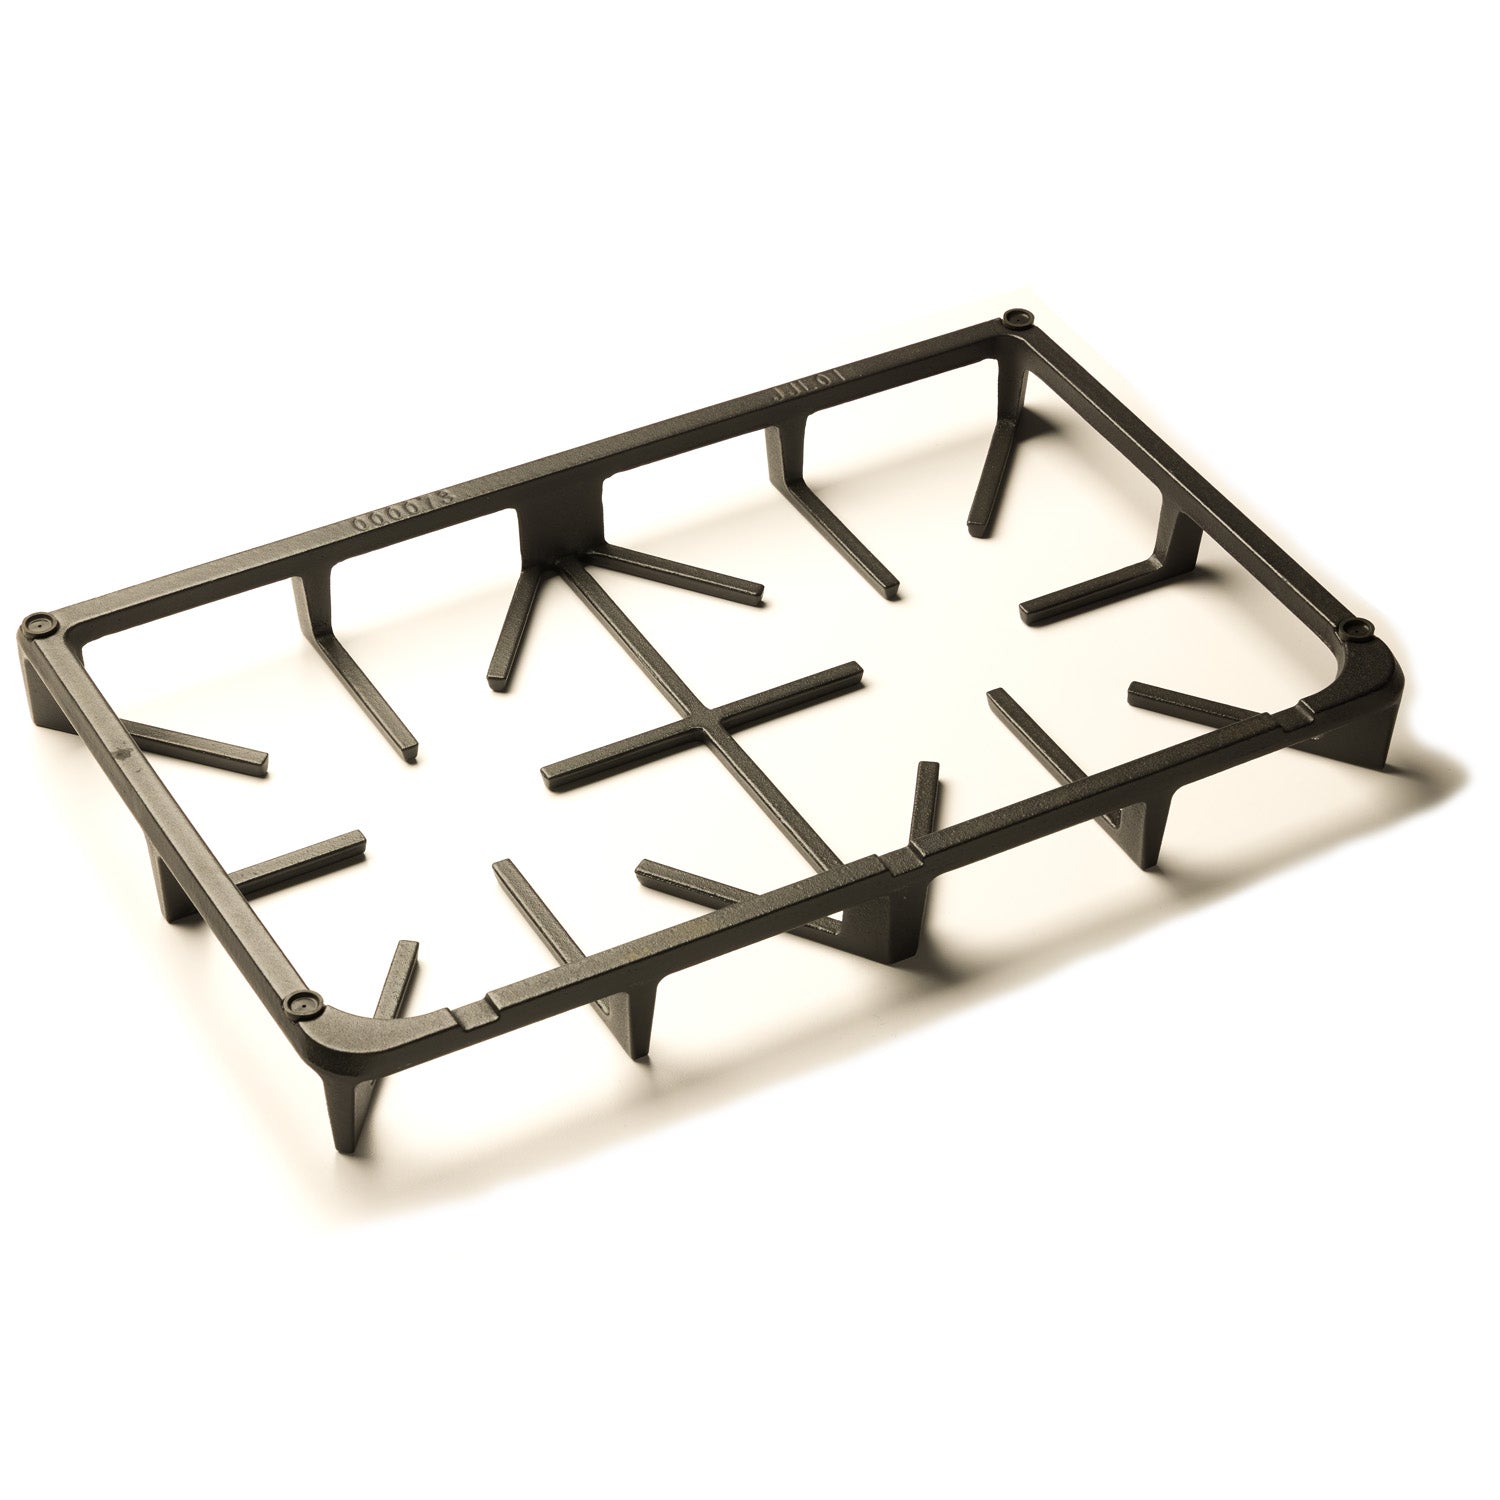 TGC3001 Left & Right Cooking Grate Part Number 13.01.000073-000-A0